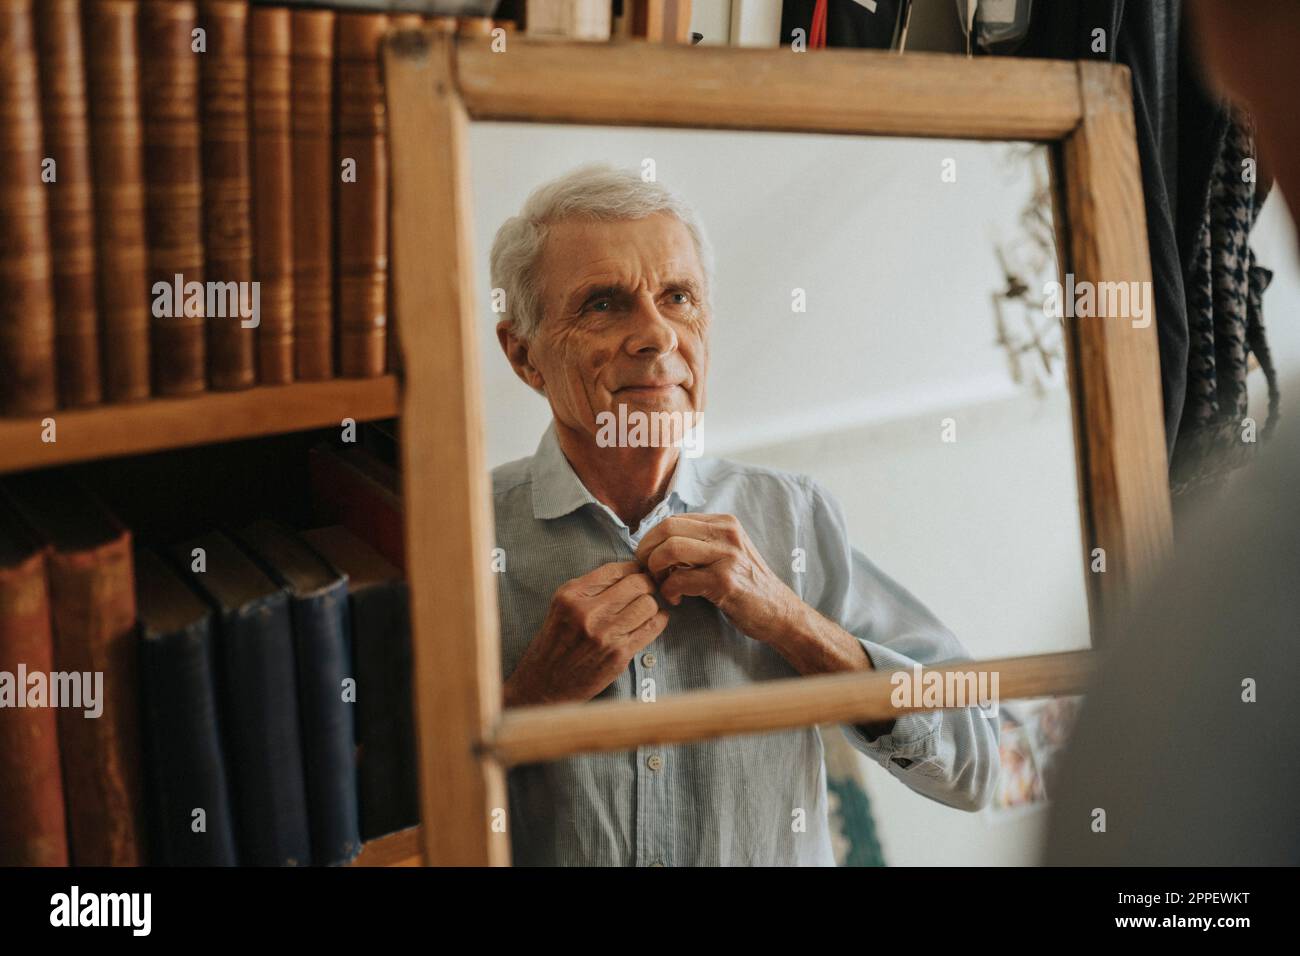 Senior man looking in mirror and buttoning shirt Stock Photo